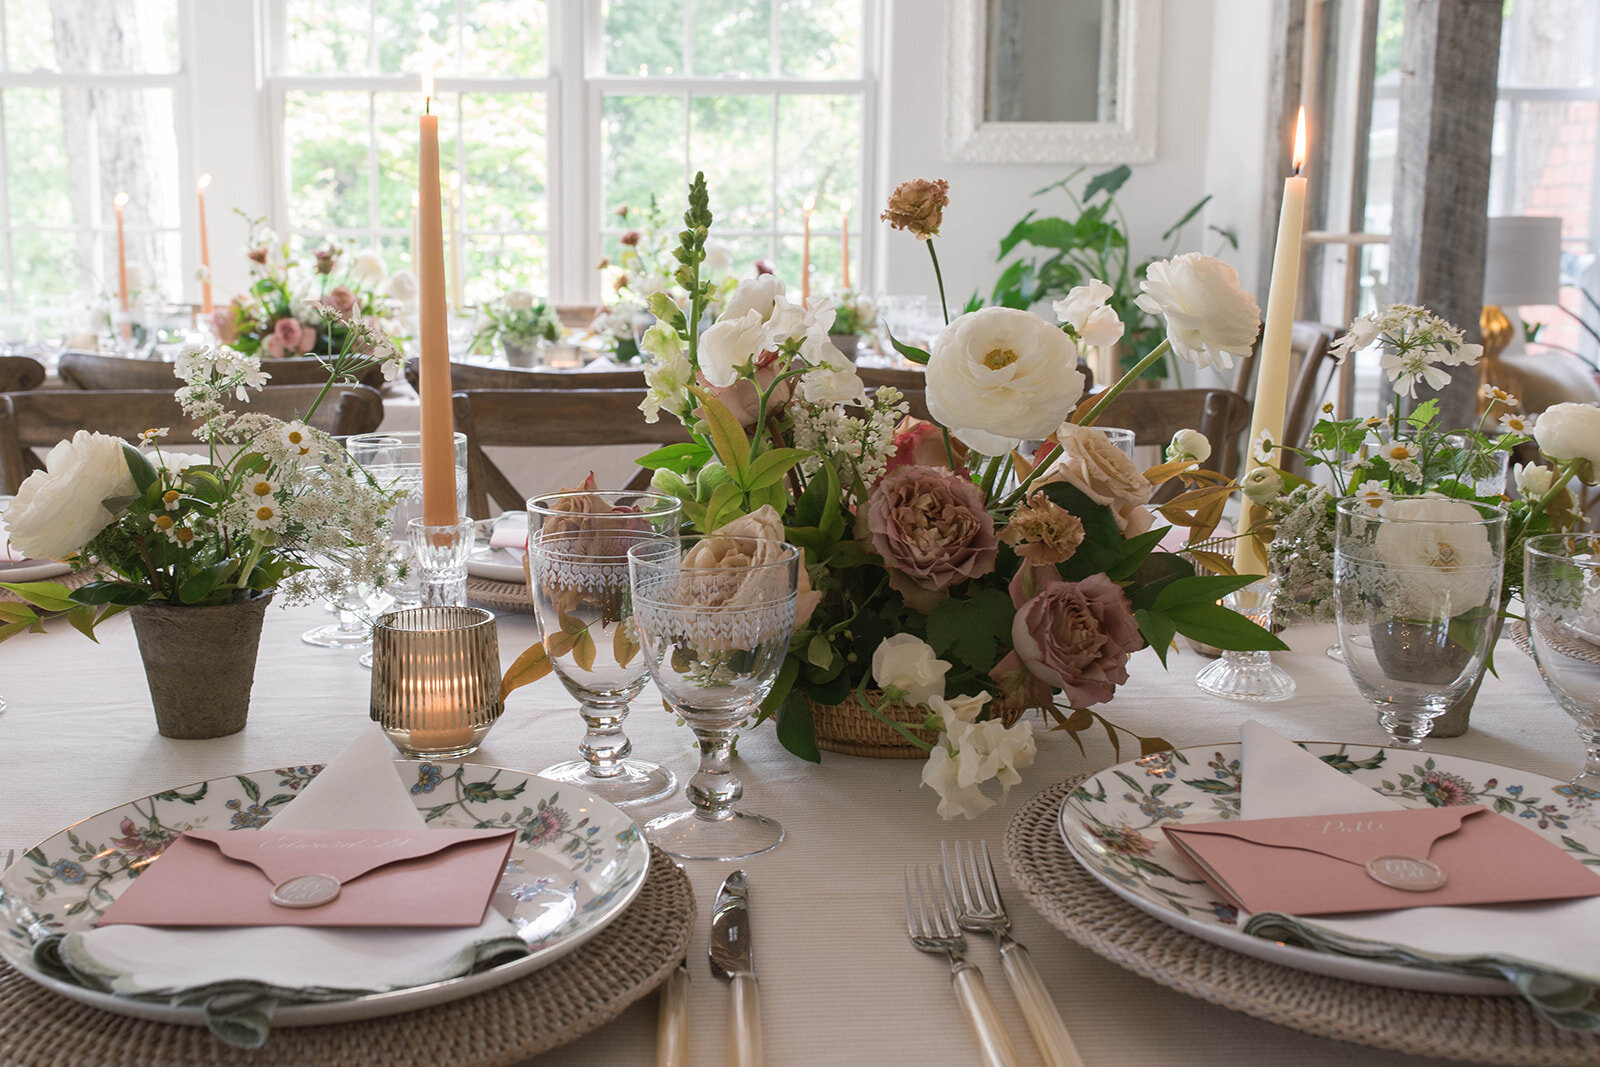 A long table with floral arrangements including white ranunculus, white snapdragons, brown lisianthus, mauve garden roses, and greenery with cream and sand-stone colored taper candles.